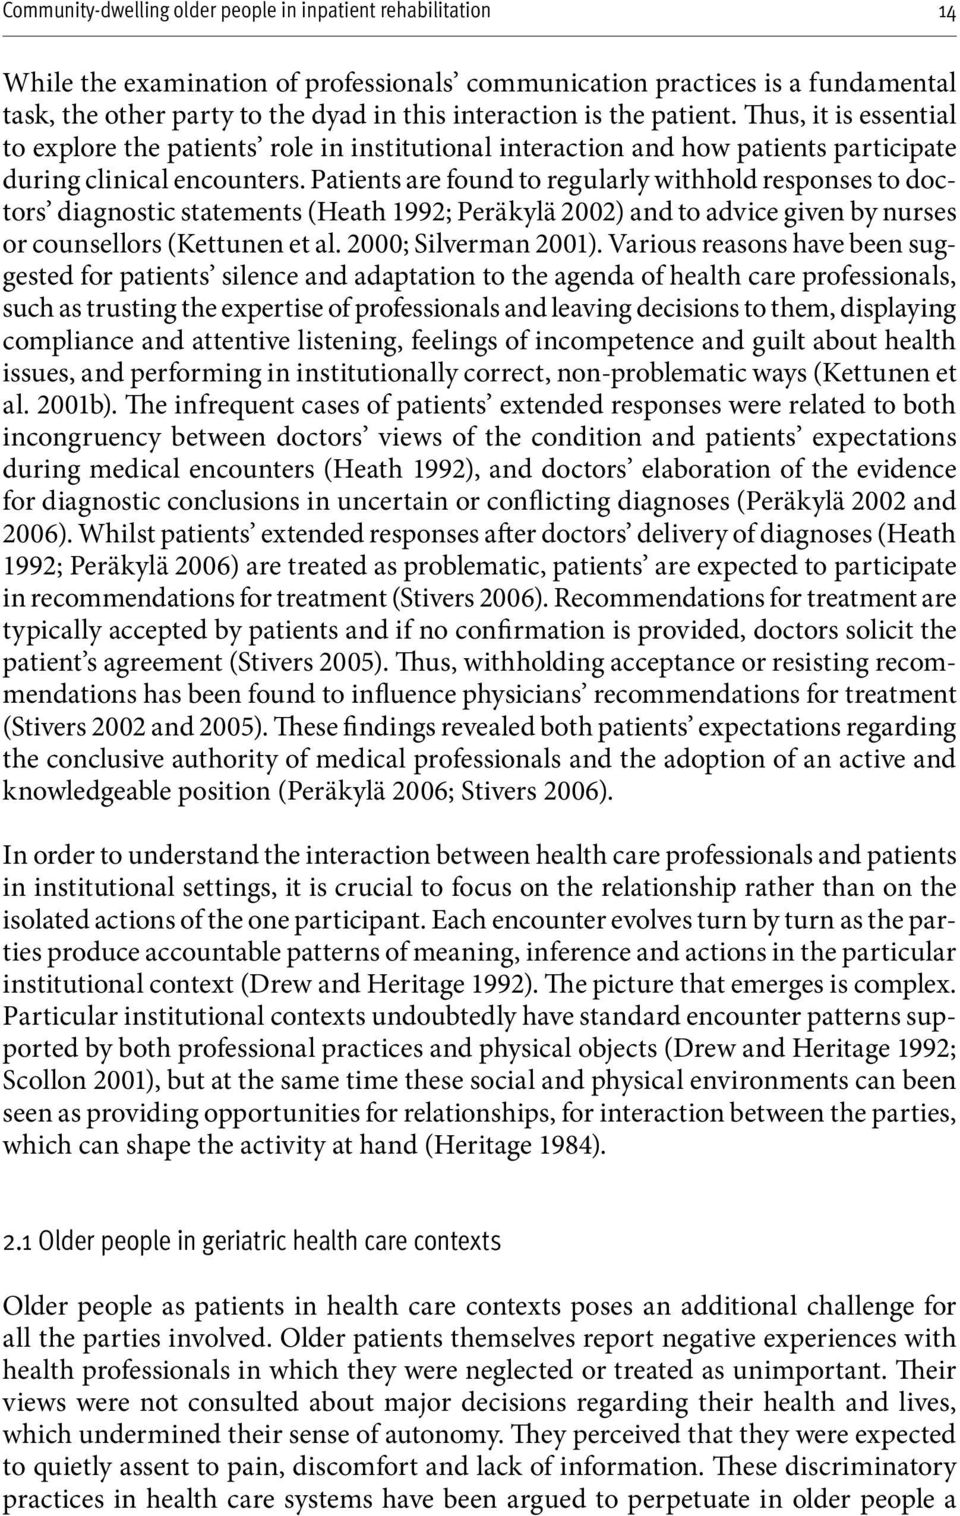 Patients are found to regularly withhold responses to doctors diagnostic statements (Heath 1992; Peräkylä 2002) and to advice given by nurses or counsellors (Kettunen et al. 2000; Silverman 2001).